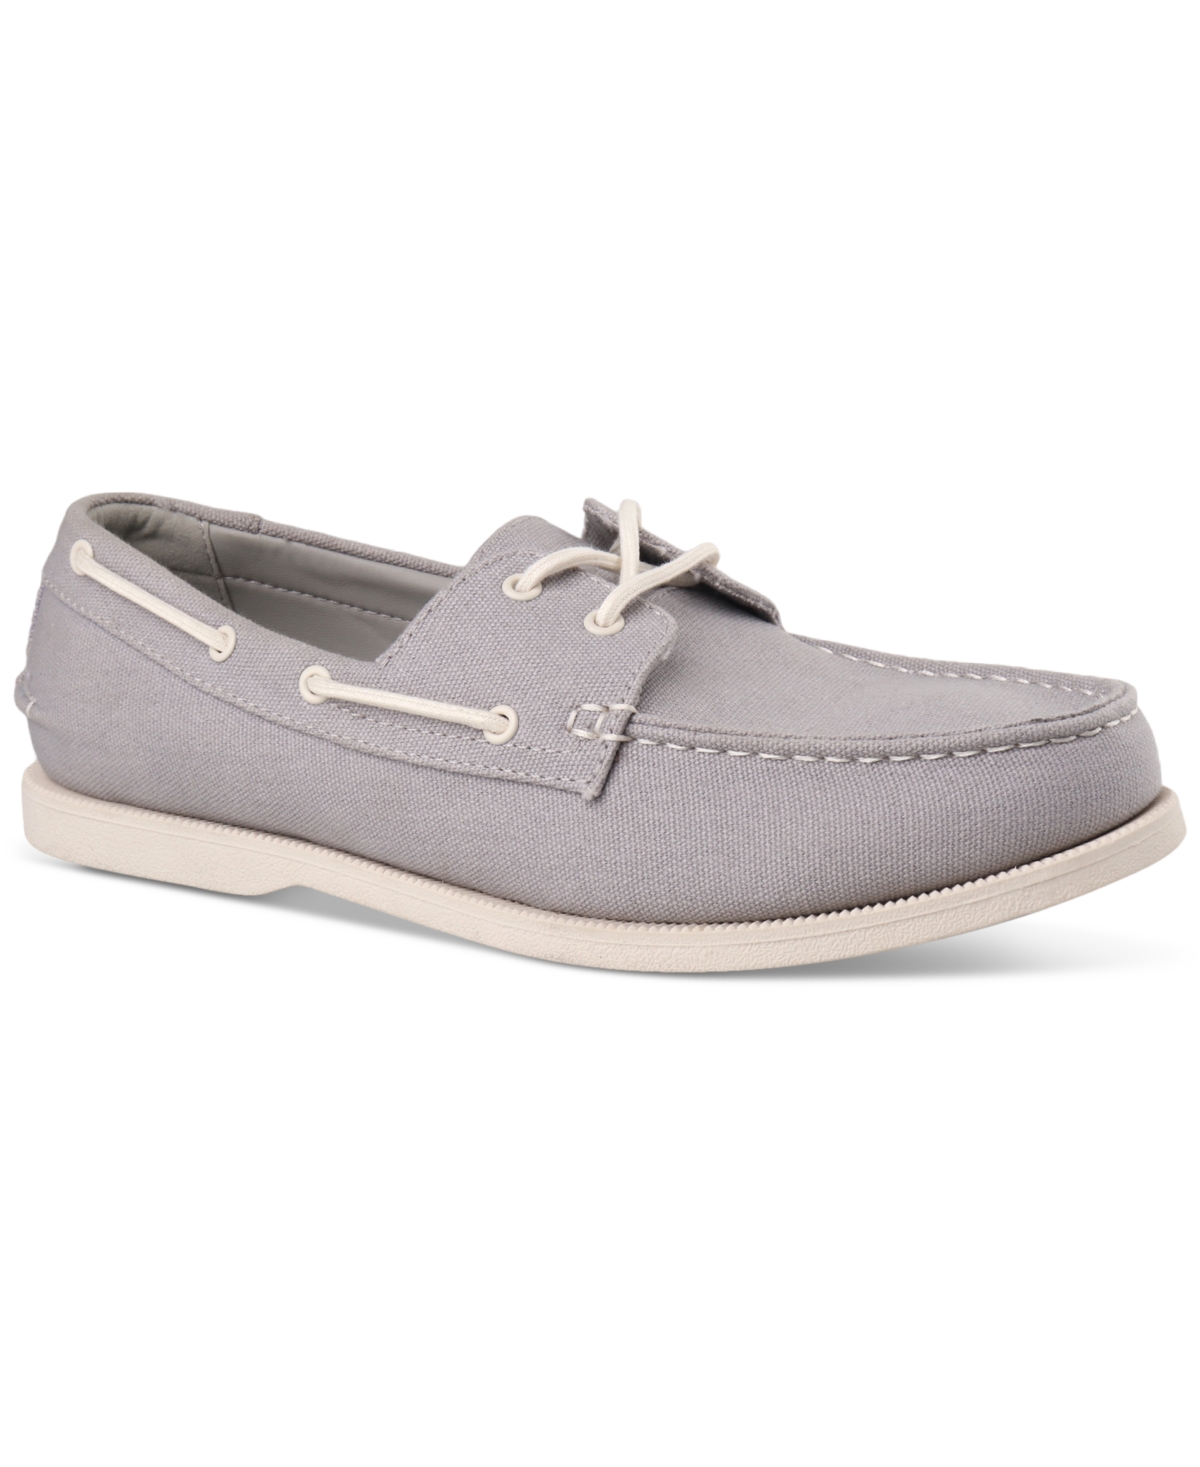 Men's Elliot Lace-Up Boat Shoes, Created for Macy's - Grey